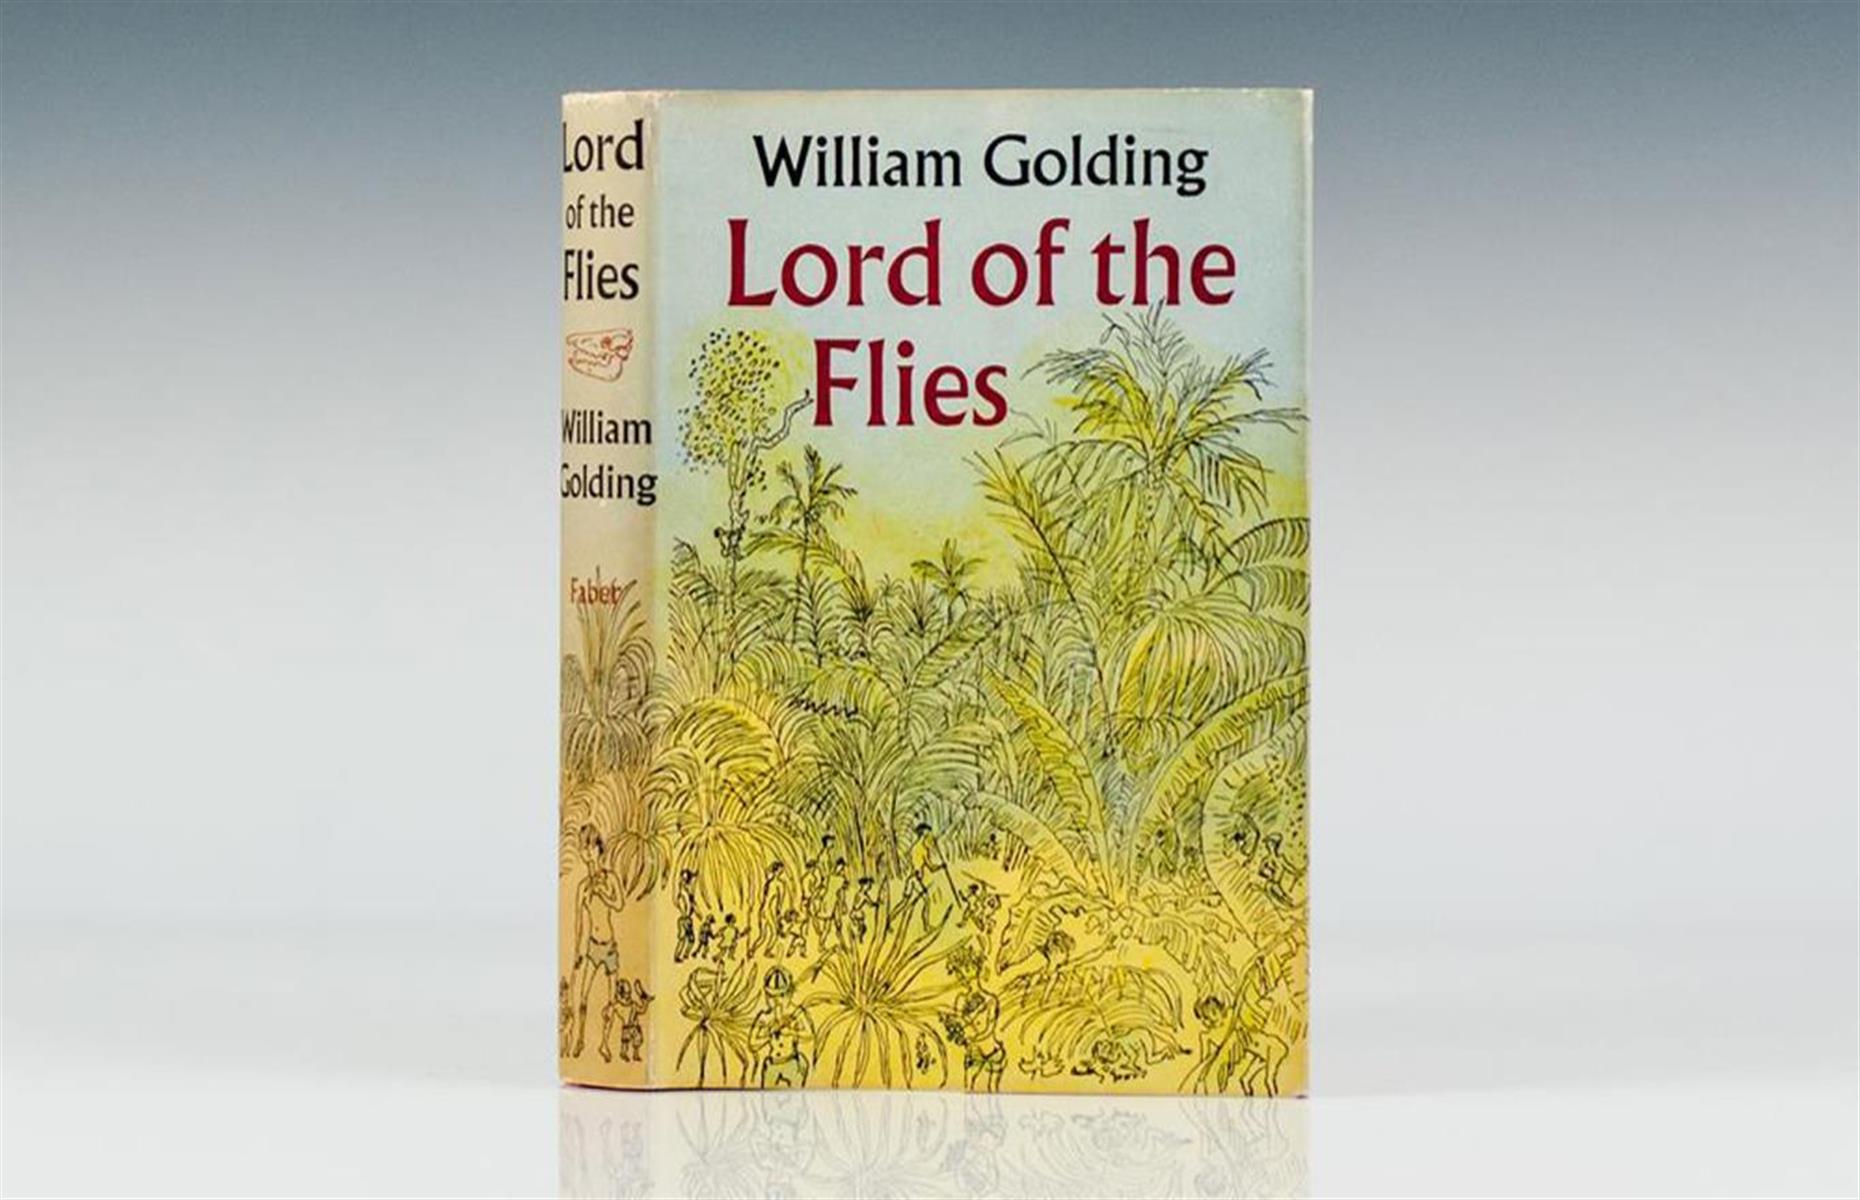 Lord of the Flies: up to $27,500 (£22,190)